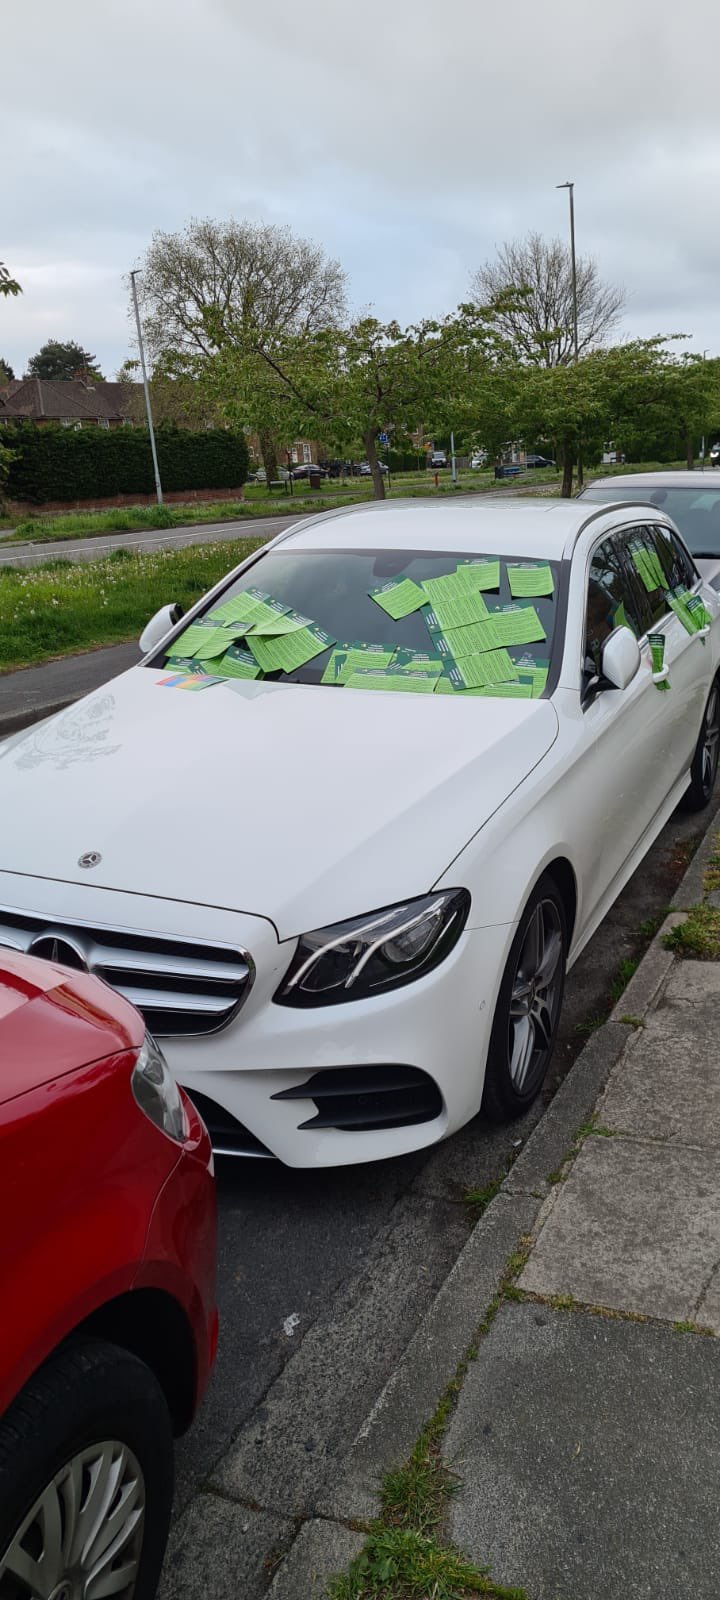 The Pioneer Academys CEO was blocked-in by two cars after visiting Moulsecoomb Primary School yesterday